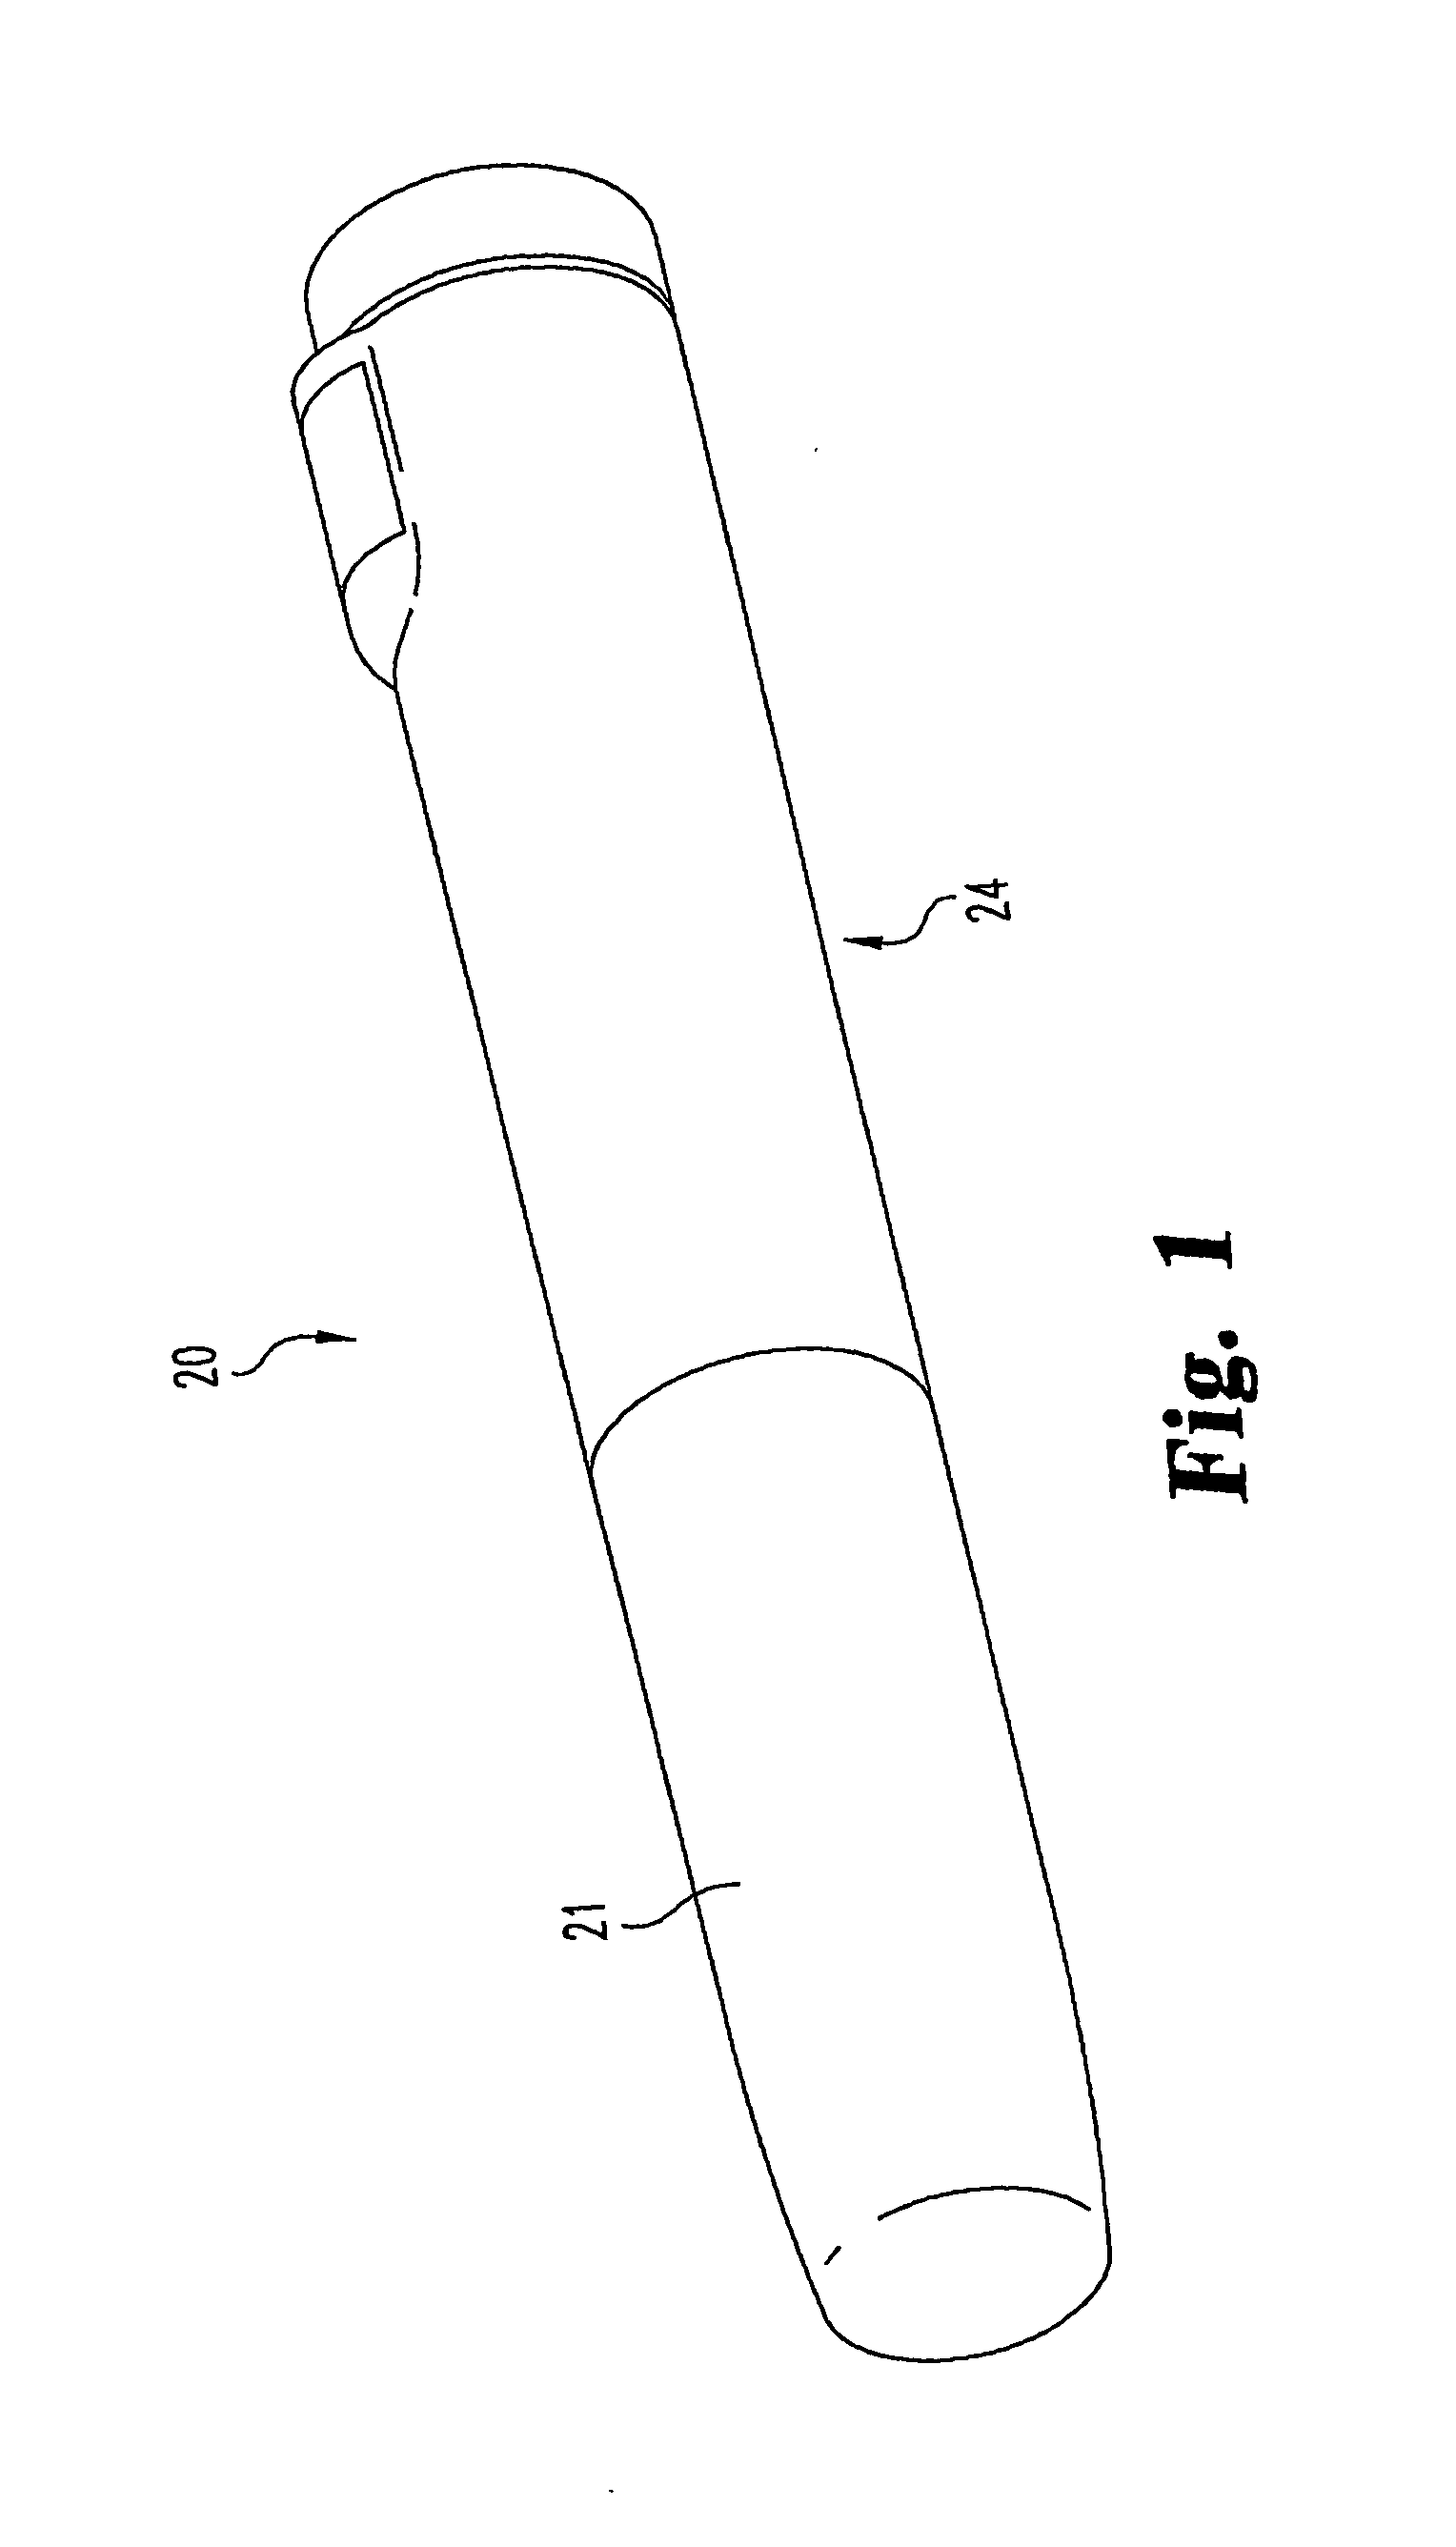 Medication dispensing apparatus with triple screw threads for mechanical advantage